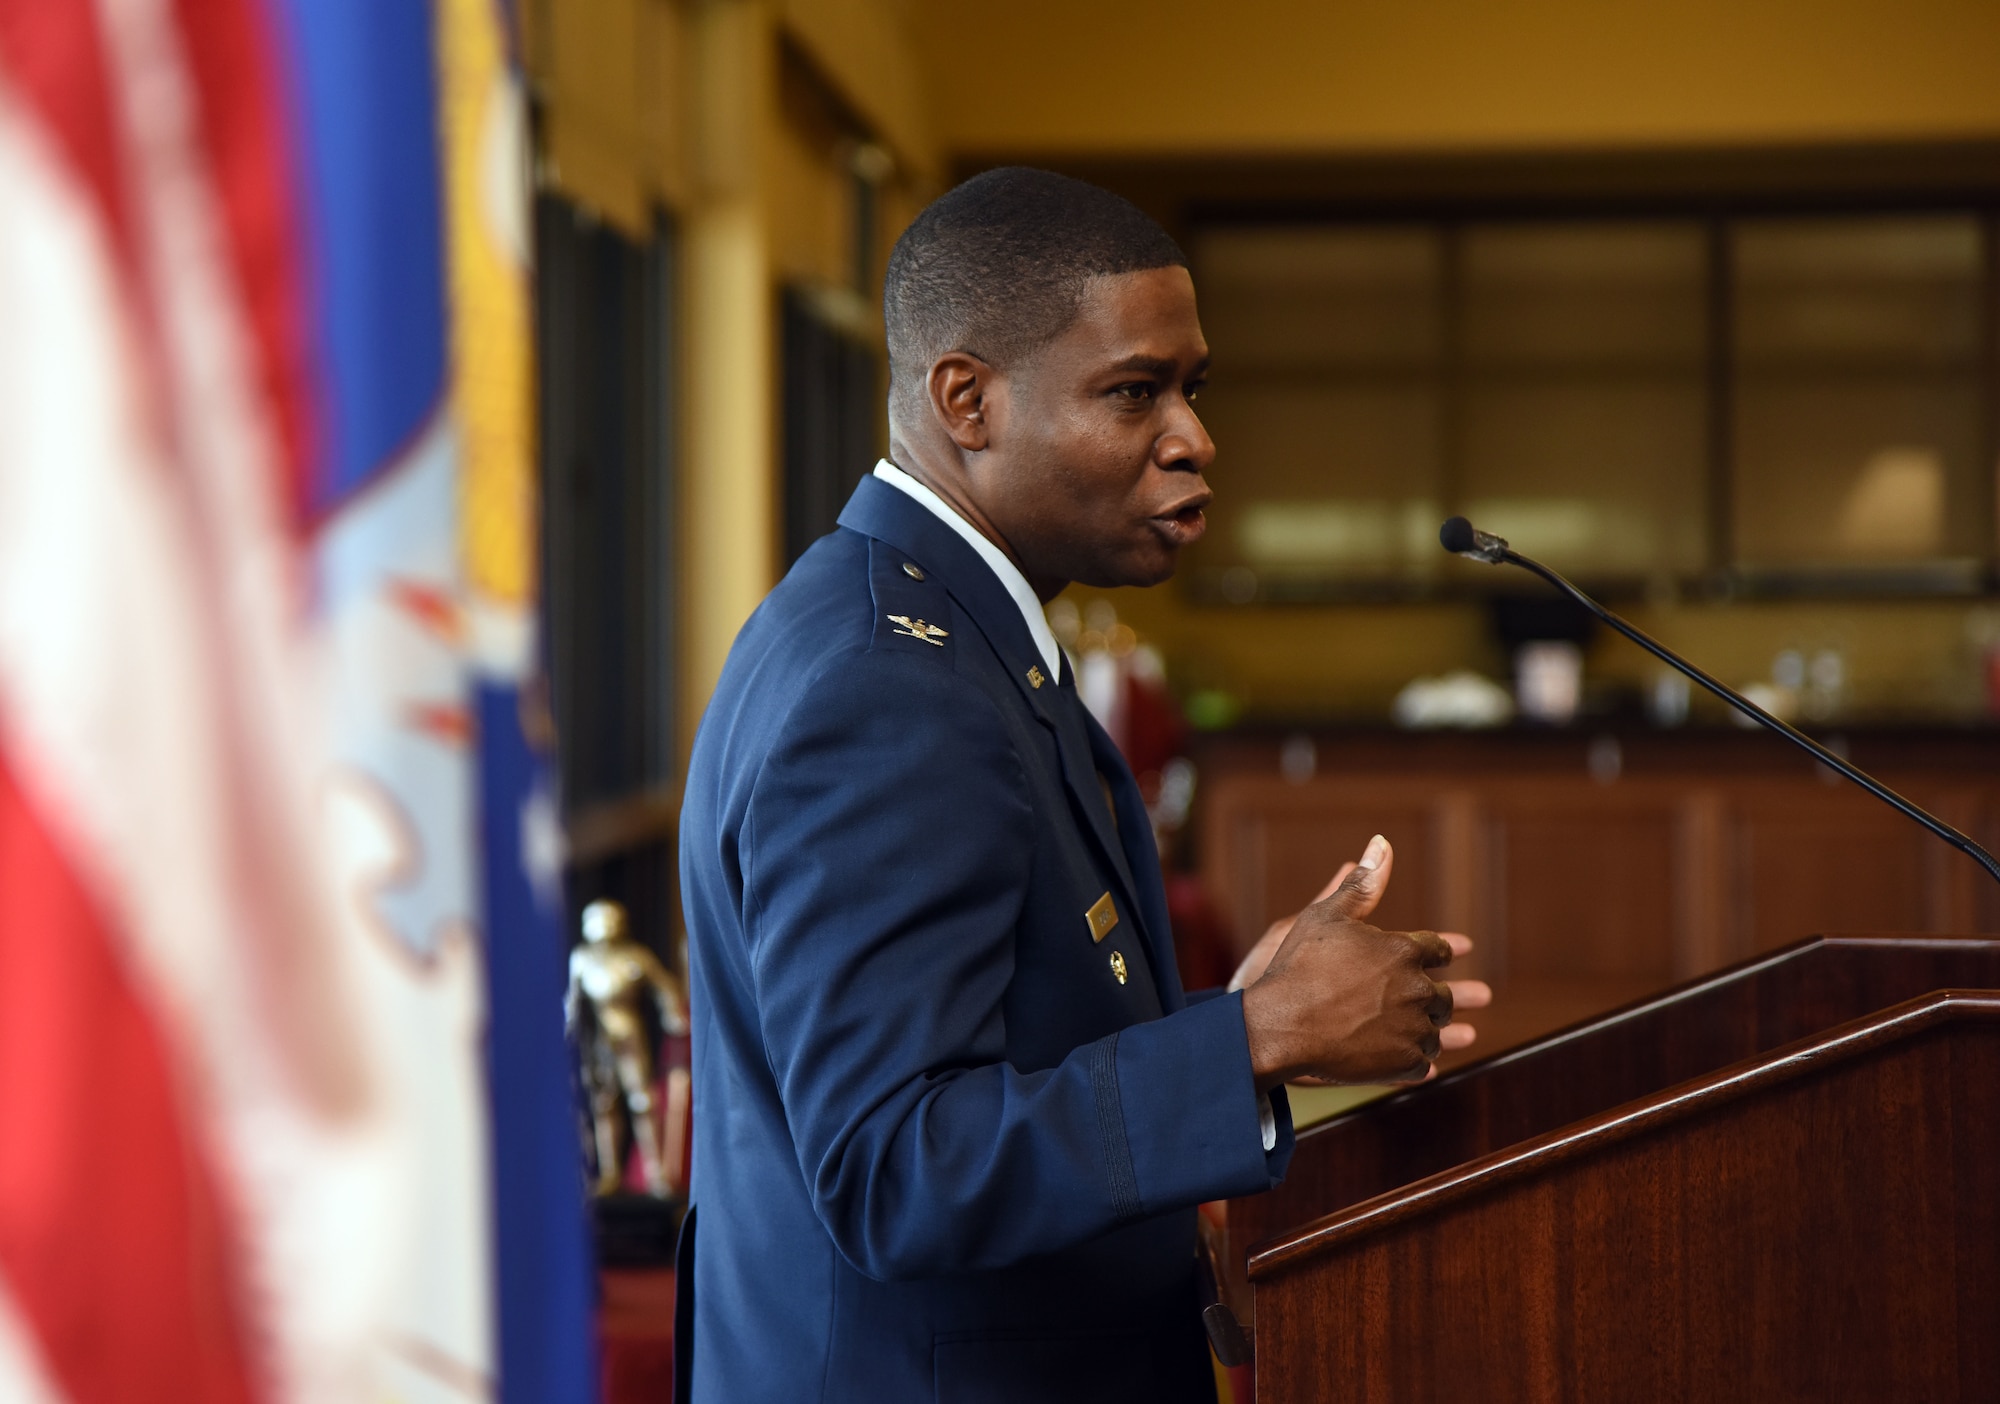 Col. Terrance Adams, Air Mobility Command director of communications and chief information officer, Scott Air Force Base, Illinois, delivers remarks during the African-American Heritage Committee Luncheon at the Bay Breeze Event Center Feb. 20, 2018, on Keesler Air Force Base, Mississippi. The theme of African American History Month this year is “African Americans in Times of War.” Proceeds from the event will benefit the Col. Lawrence E. Roberts memorial scholarship fund which helps local youth pay for tuition, books and other academic costs. Roberts, a Biloxi resident and Tuskegee Airman, passed away in 2004. (U.S. Air Force photo by Kemberly Groue)